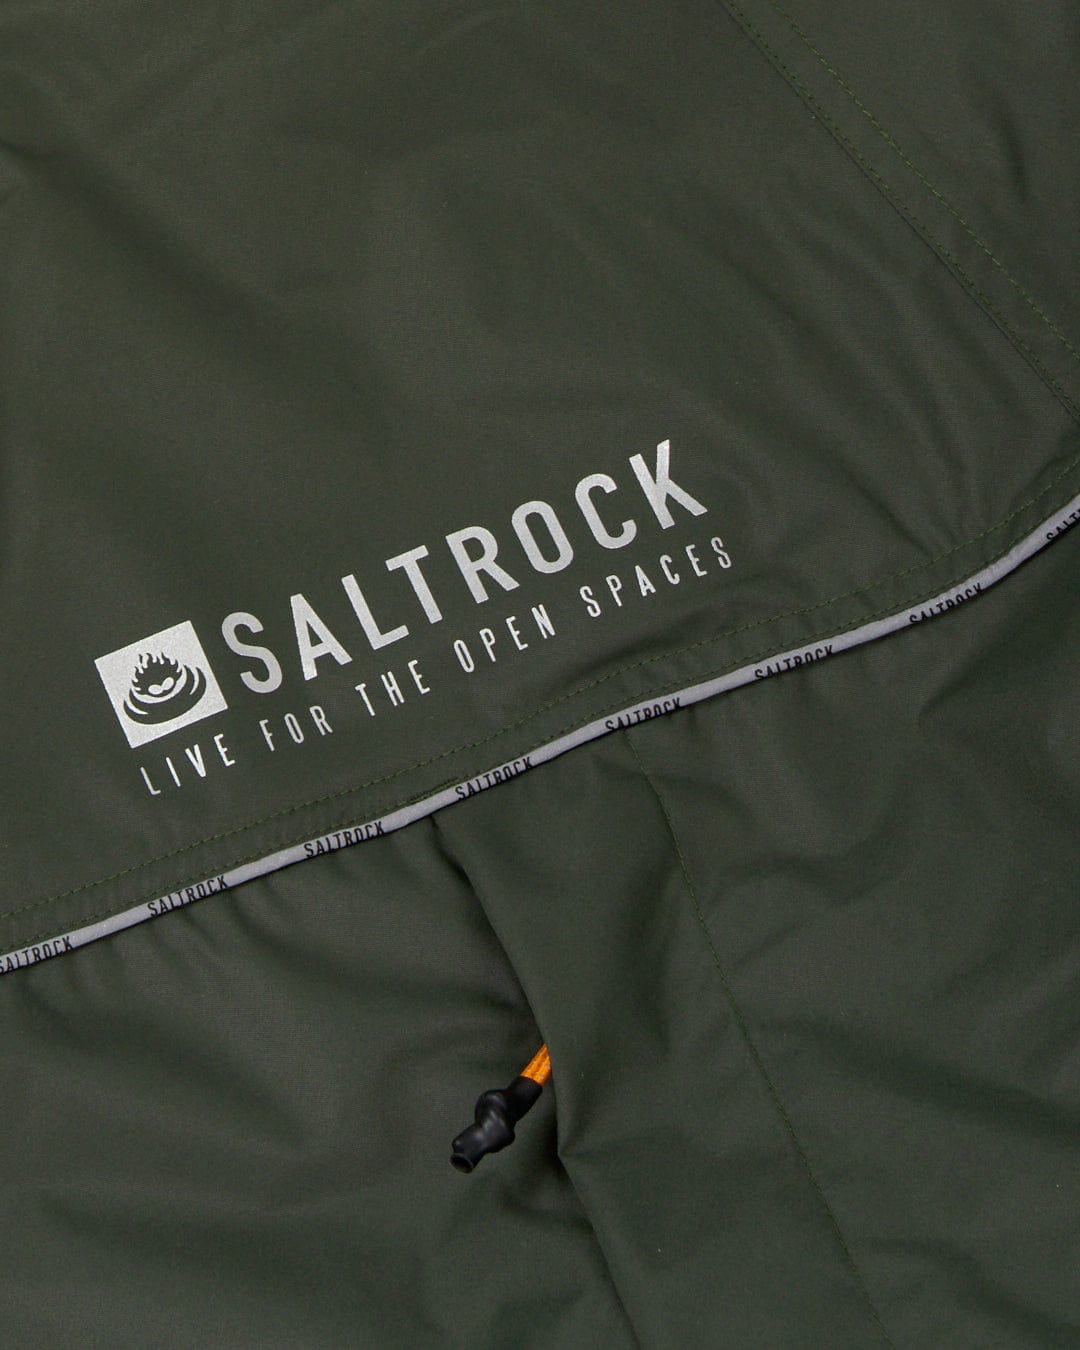 Saltrock Recycled Four Seasons Changing Robe - Green/Aztec with logo, drawstring detail, and fleeced lined pockets.